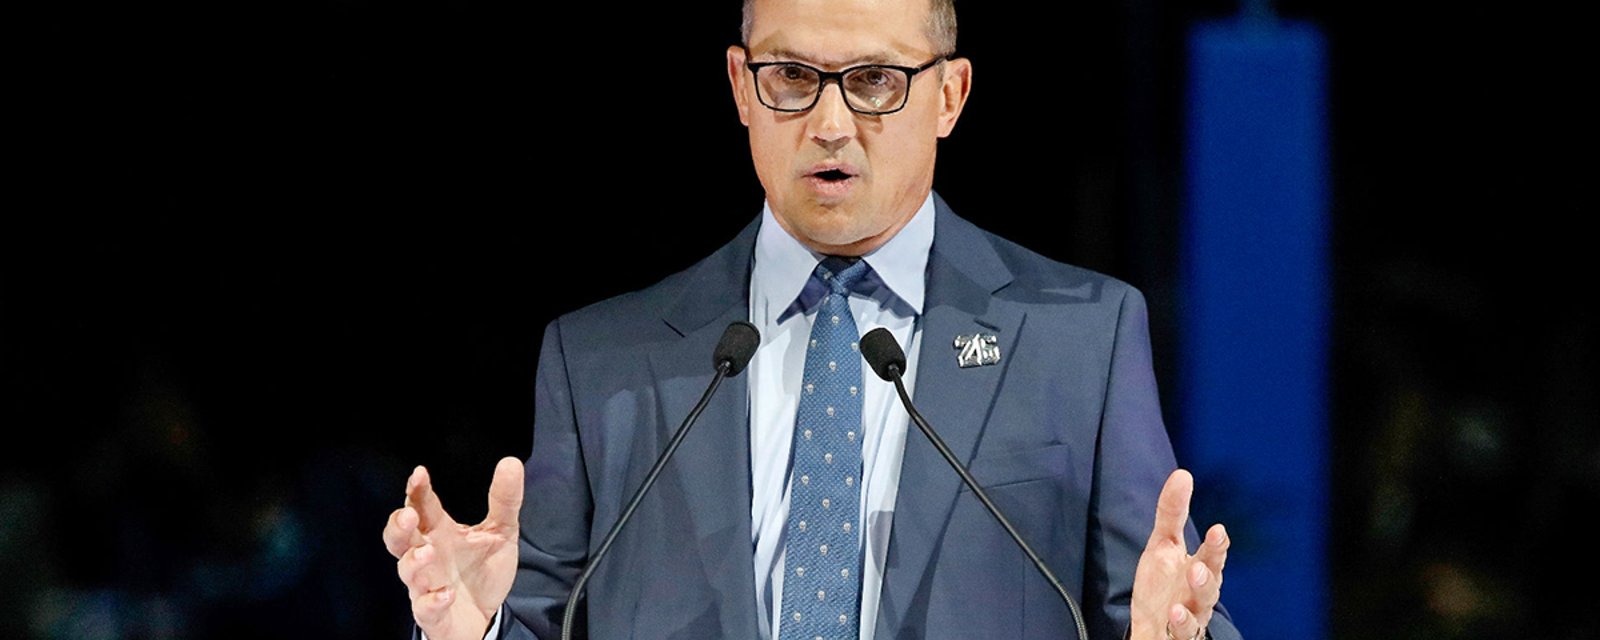 Report: Yzerman emerges as candidate for Flyers GM job